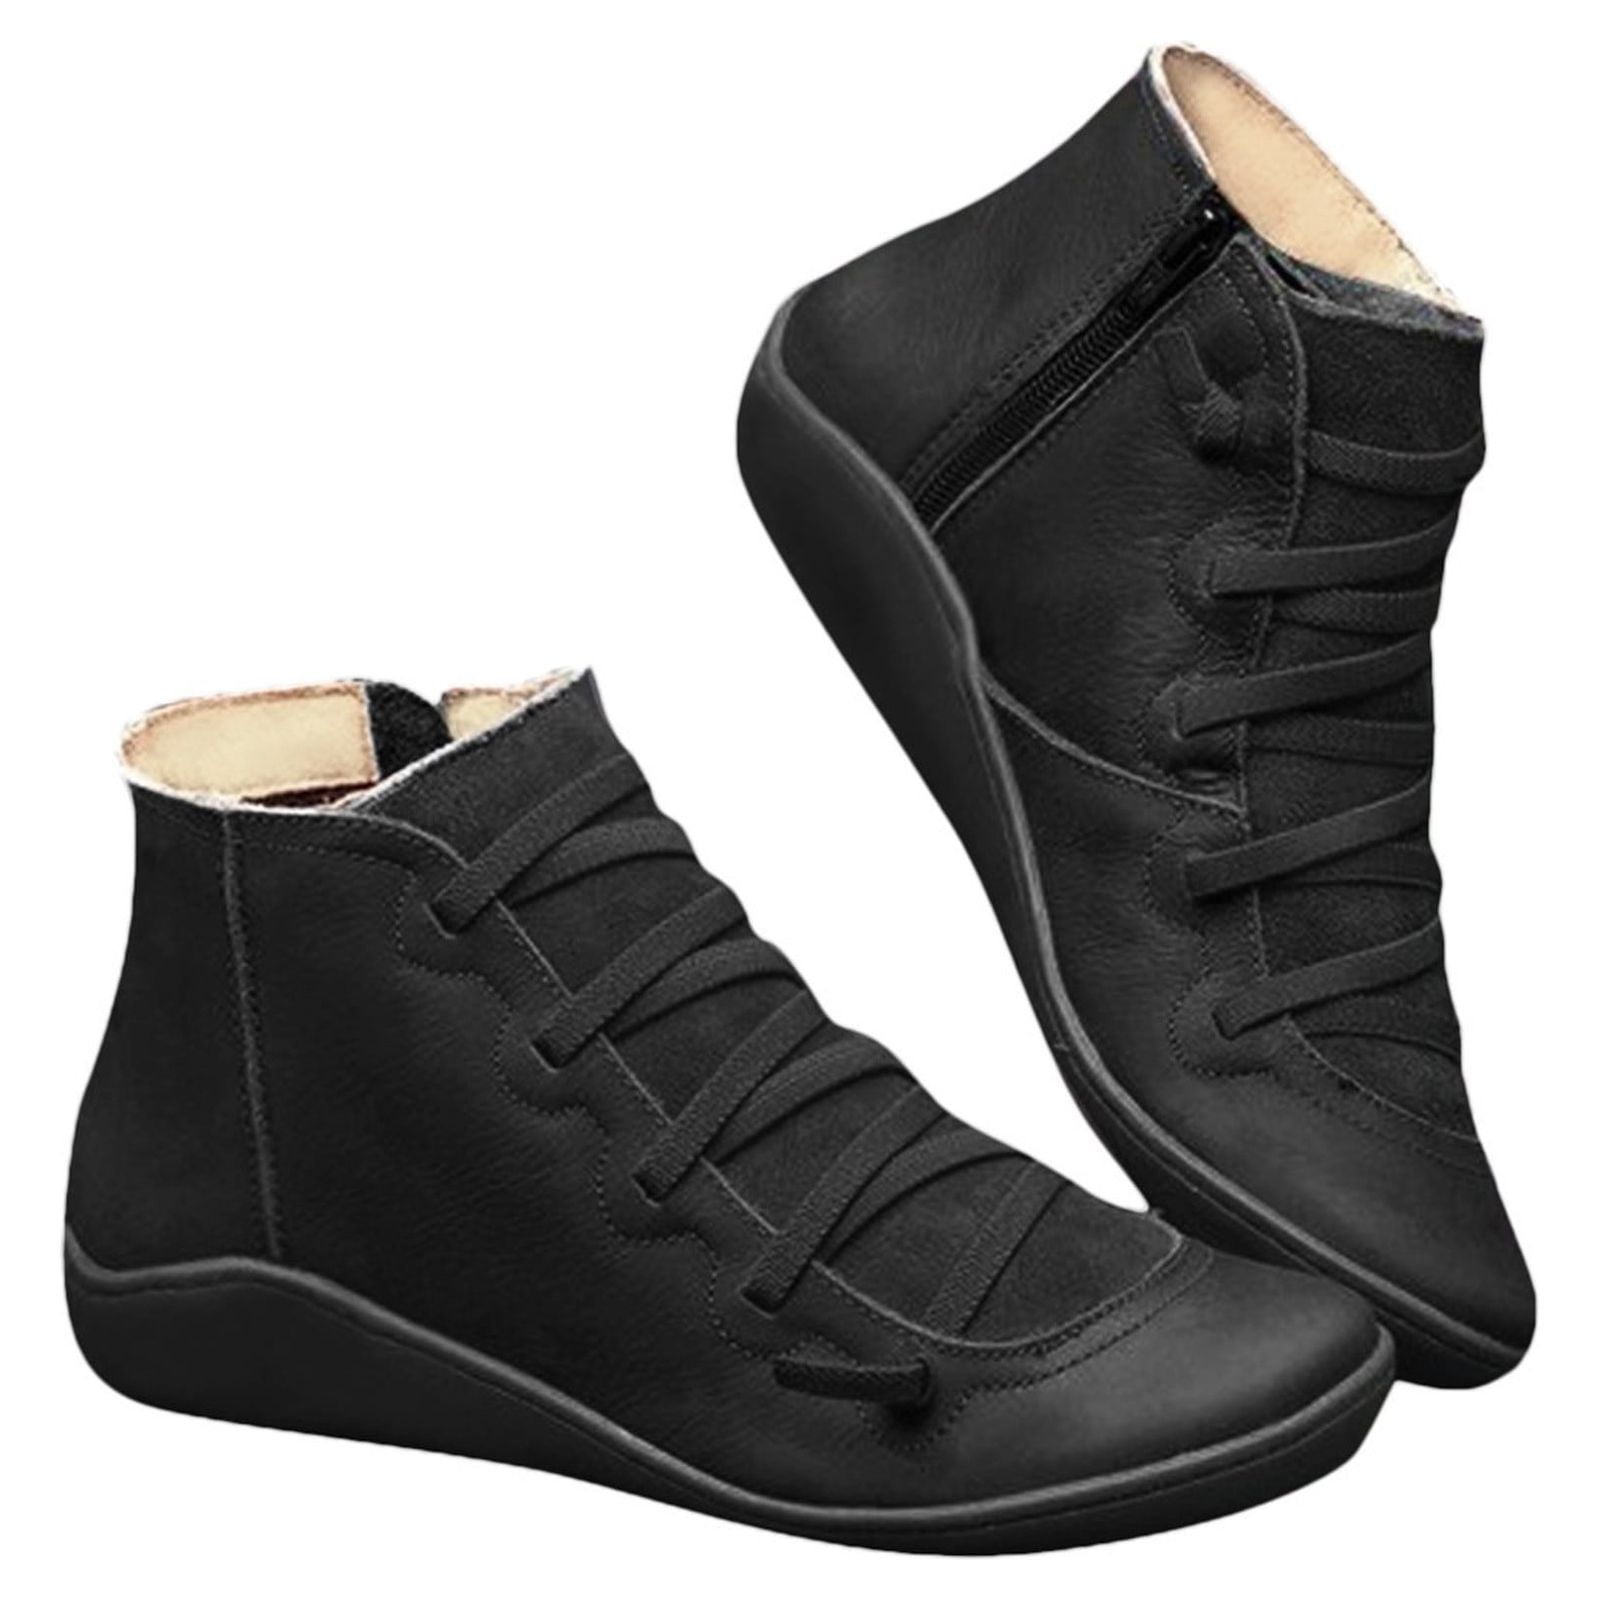 Dezsed Women's Low-heeled Ankle Boots Clearance Women Casual Flat ...